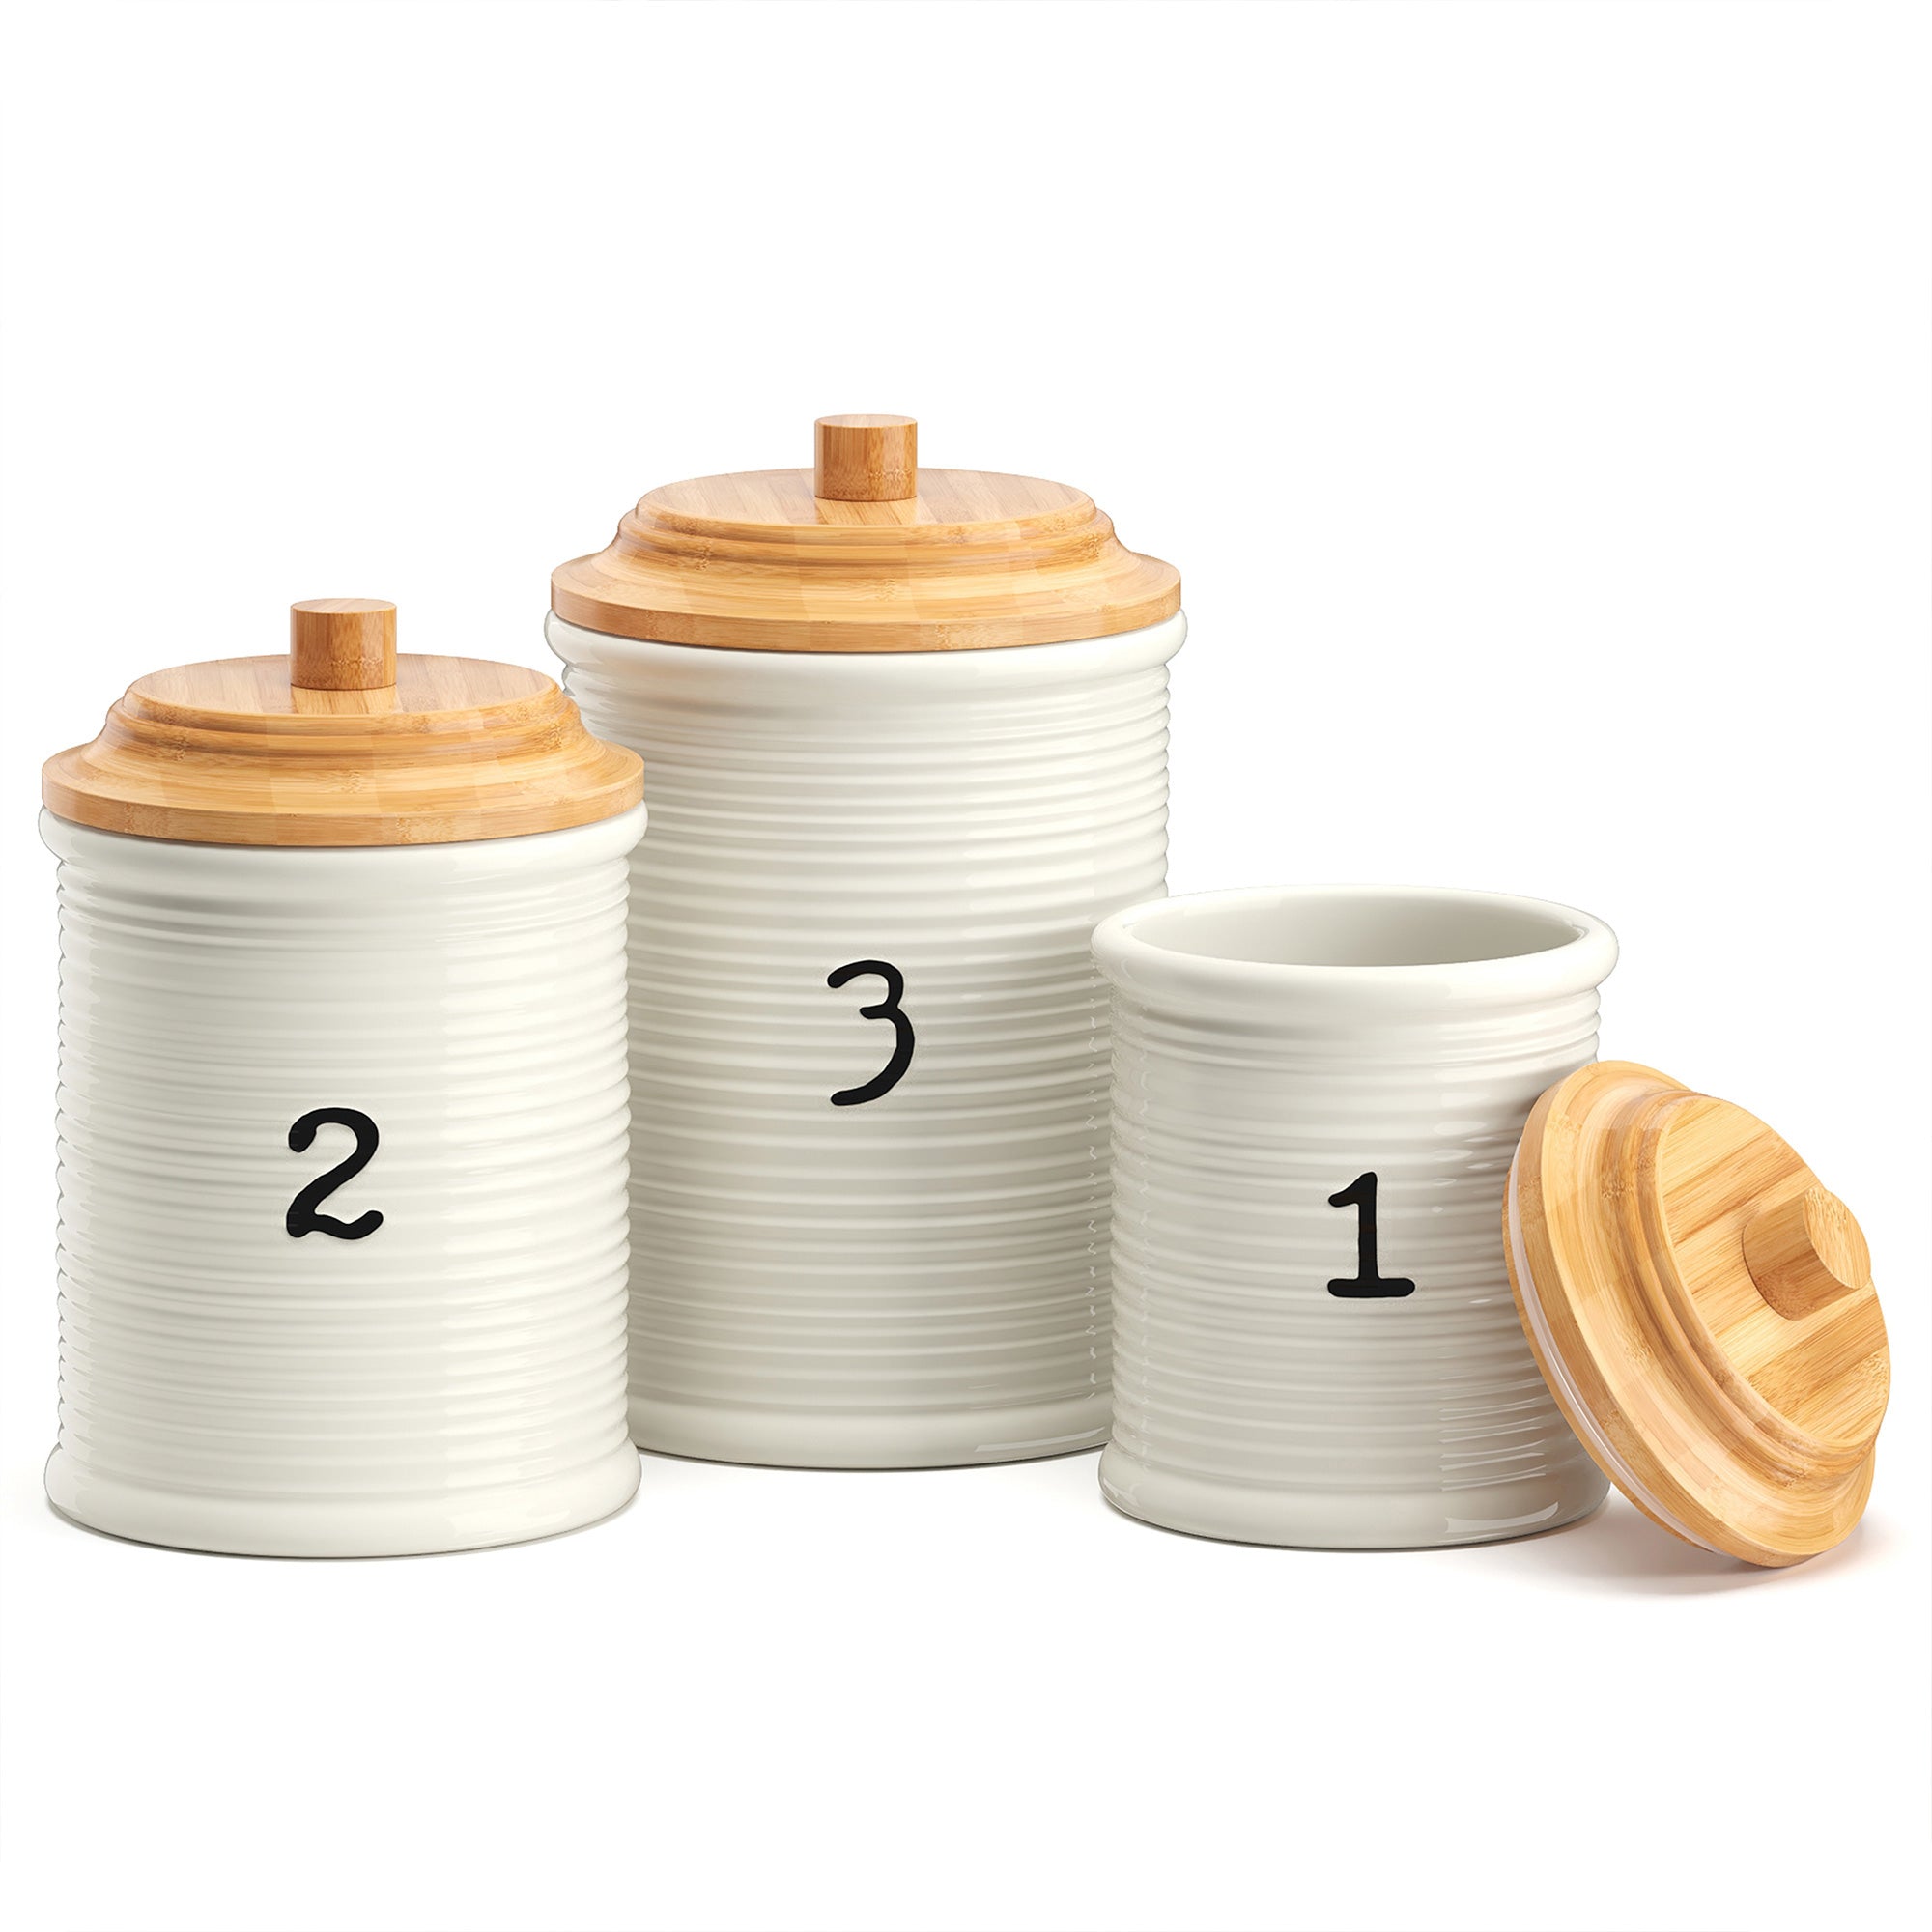 Barnyard Designs Kitchen Canister Set, Numbered Airtight Ceramic Containers with Wooden Lids, Decorative Coffee, Sugar, Tea Storage for Rustic